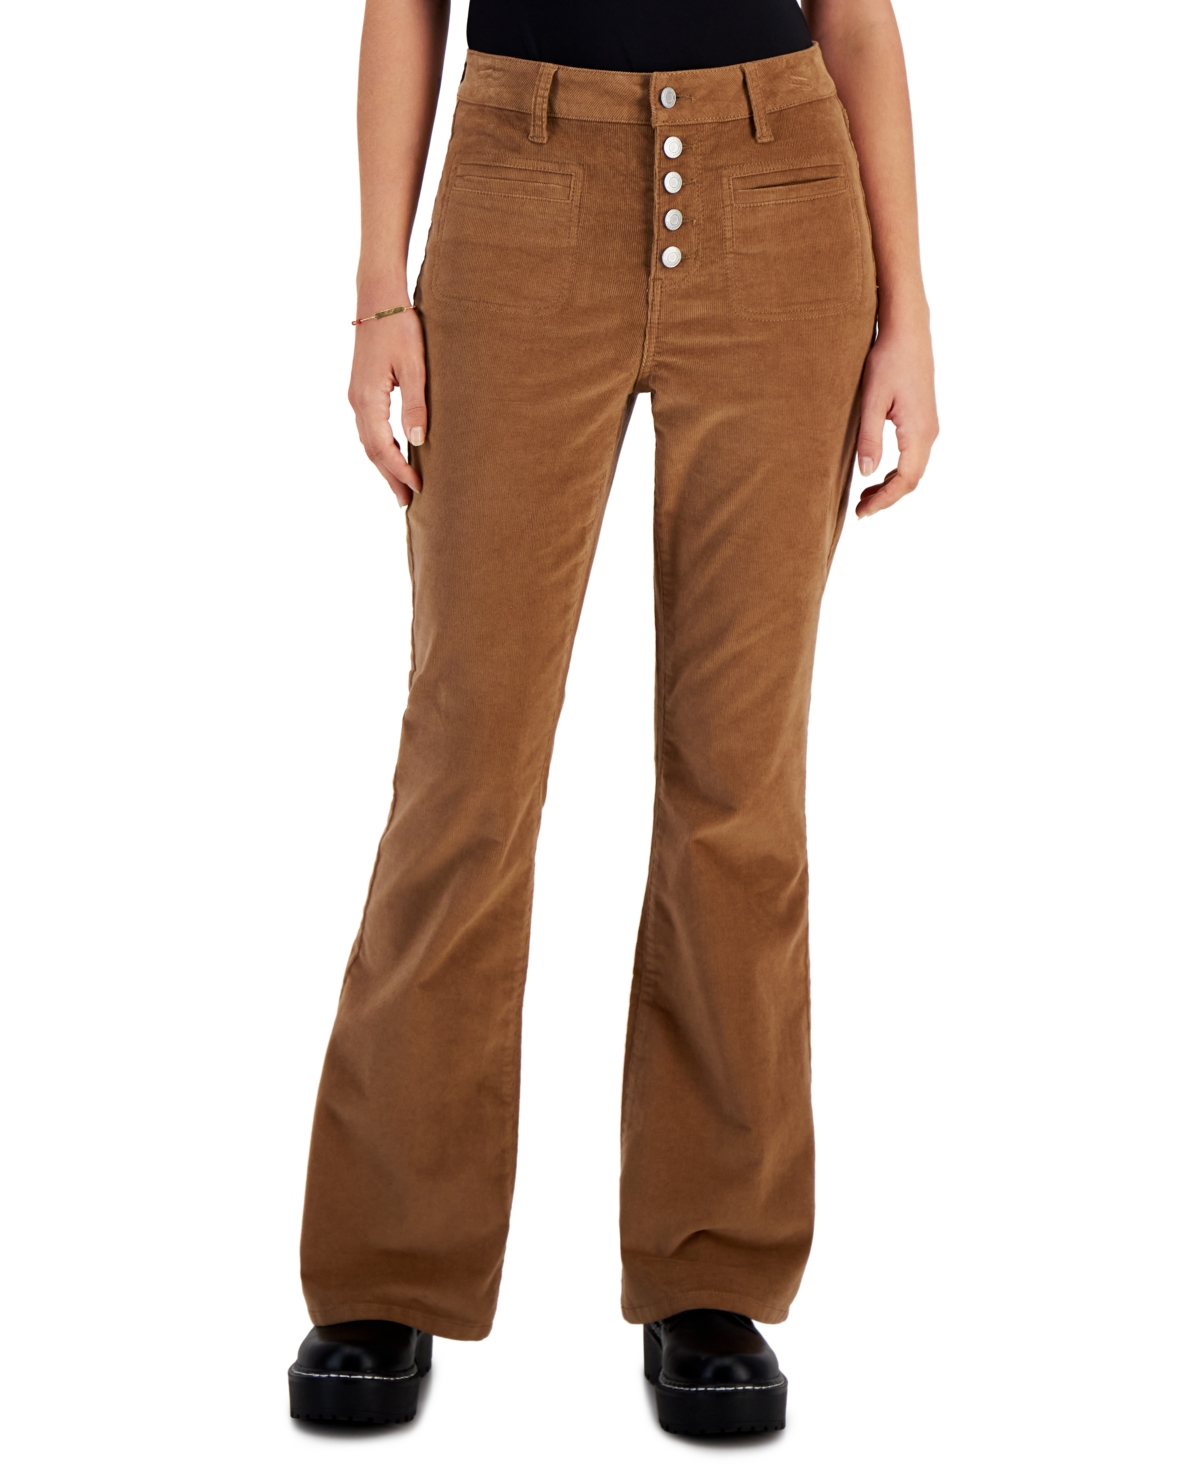 Juniors' Corduroy High-Rise Button-Fly Pants - Fawn